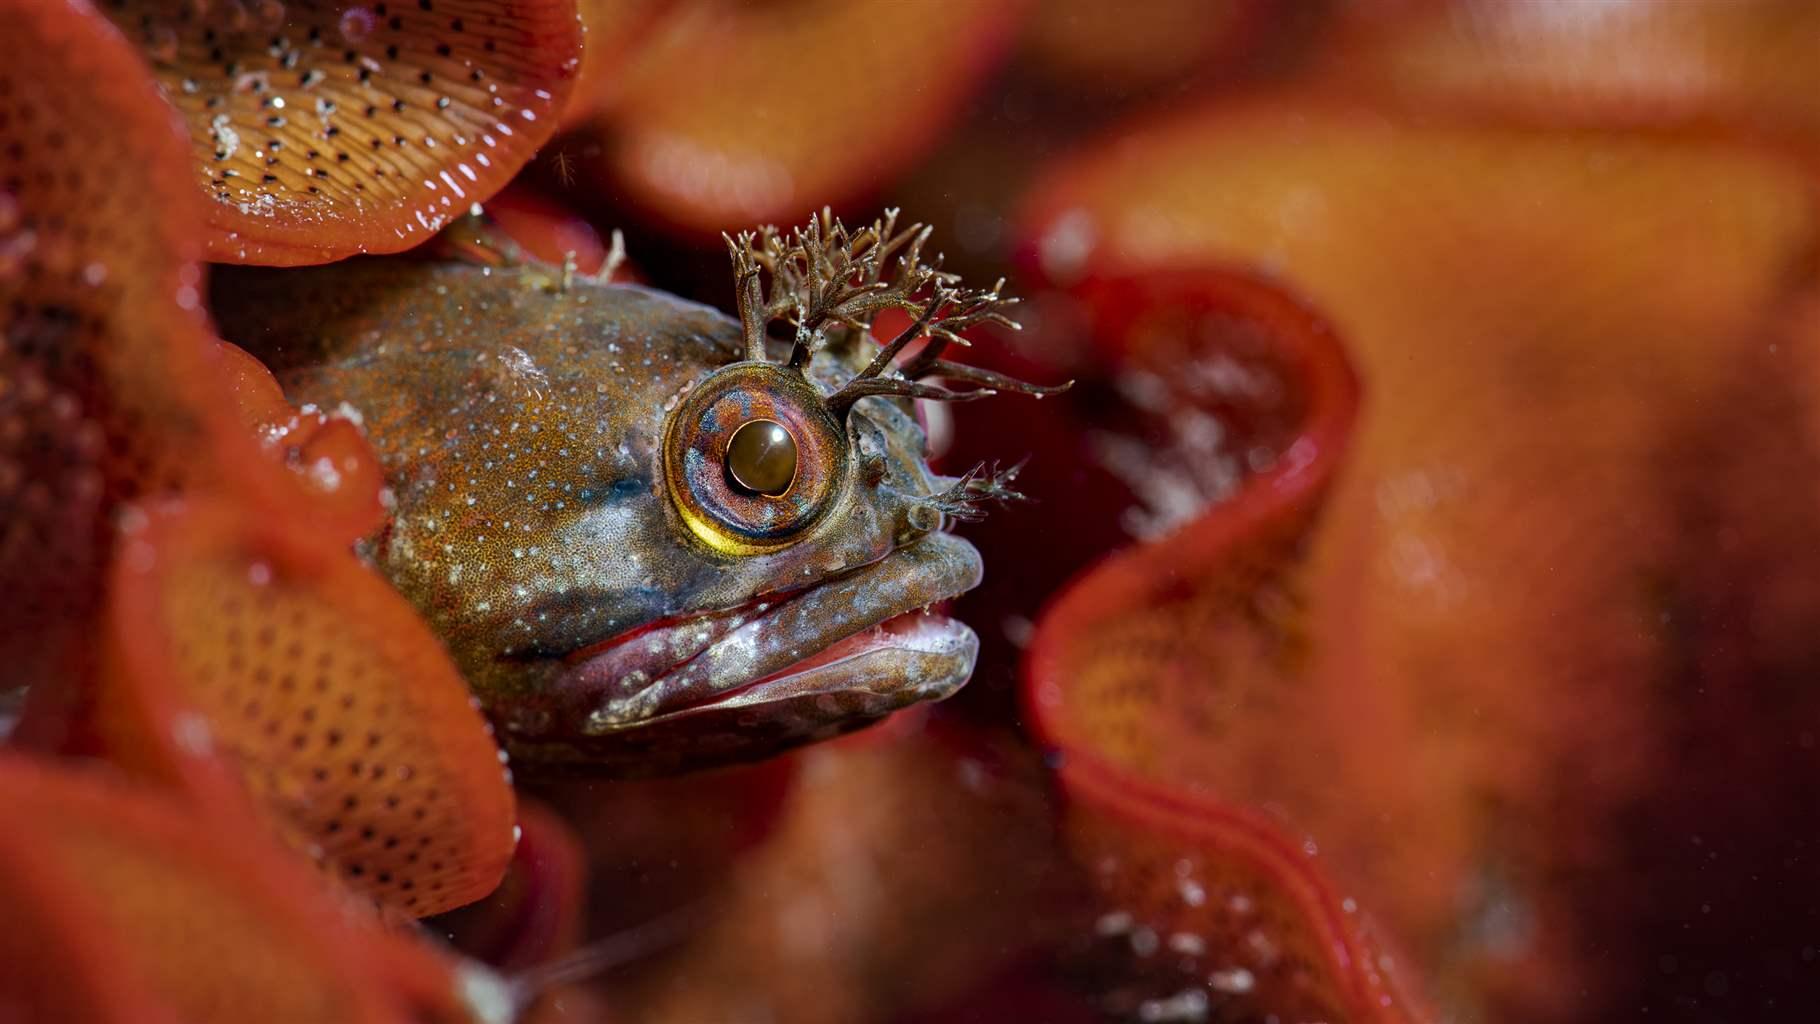  A dark speckled fish with branching structures near its eyes pokes its head out from red bryozoan.